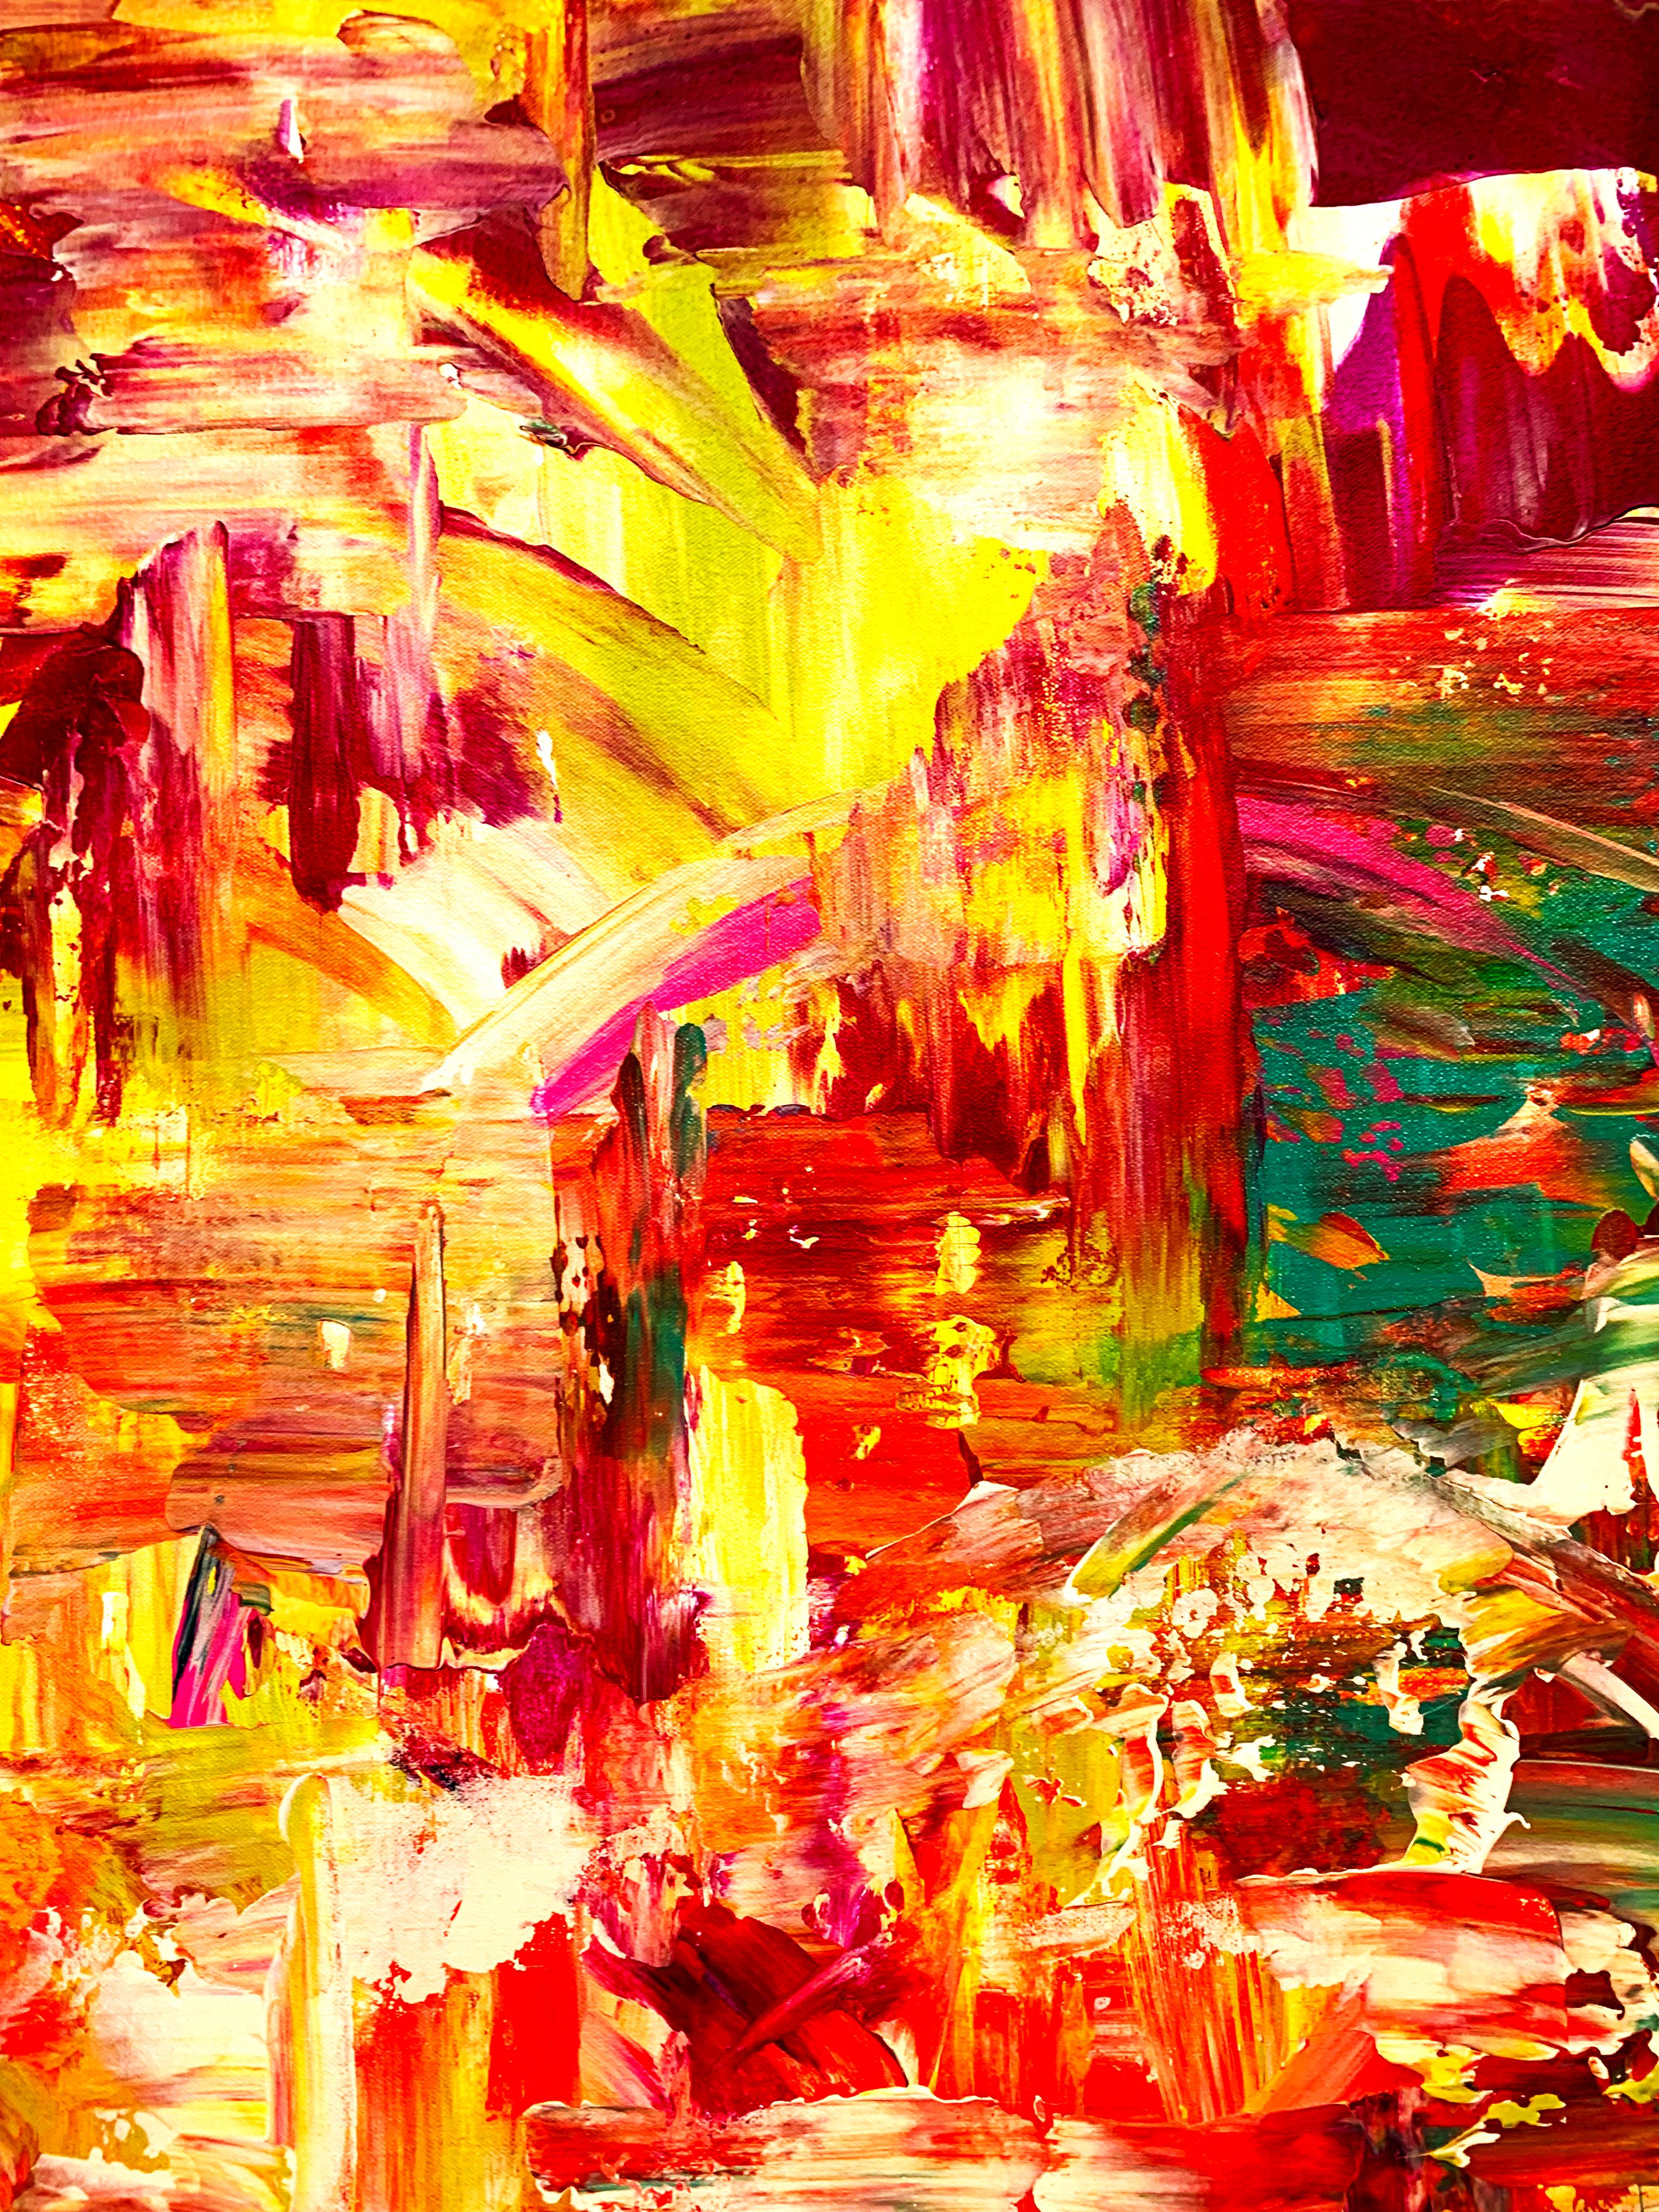 This painting is an abstract rendition of arriving at Elysium. In Greek mythology, Elysium is the paradise to which heroes on whom the gods conferred immortality were sent.. This work is painted in the style of abstract expressionism.

This work is